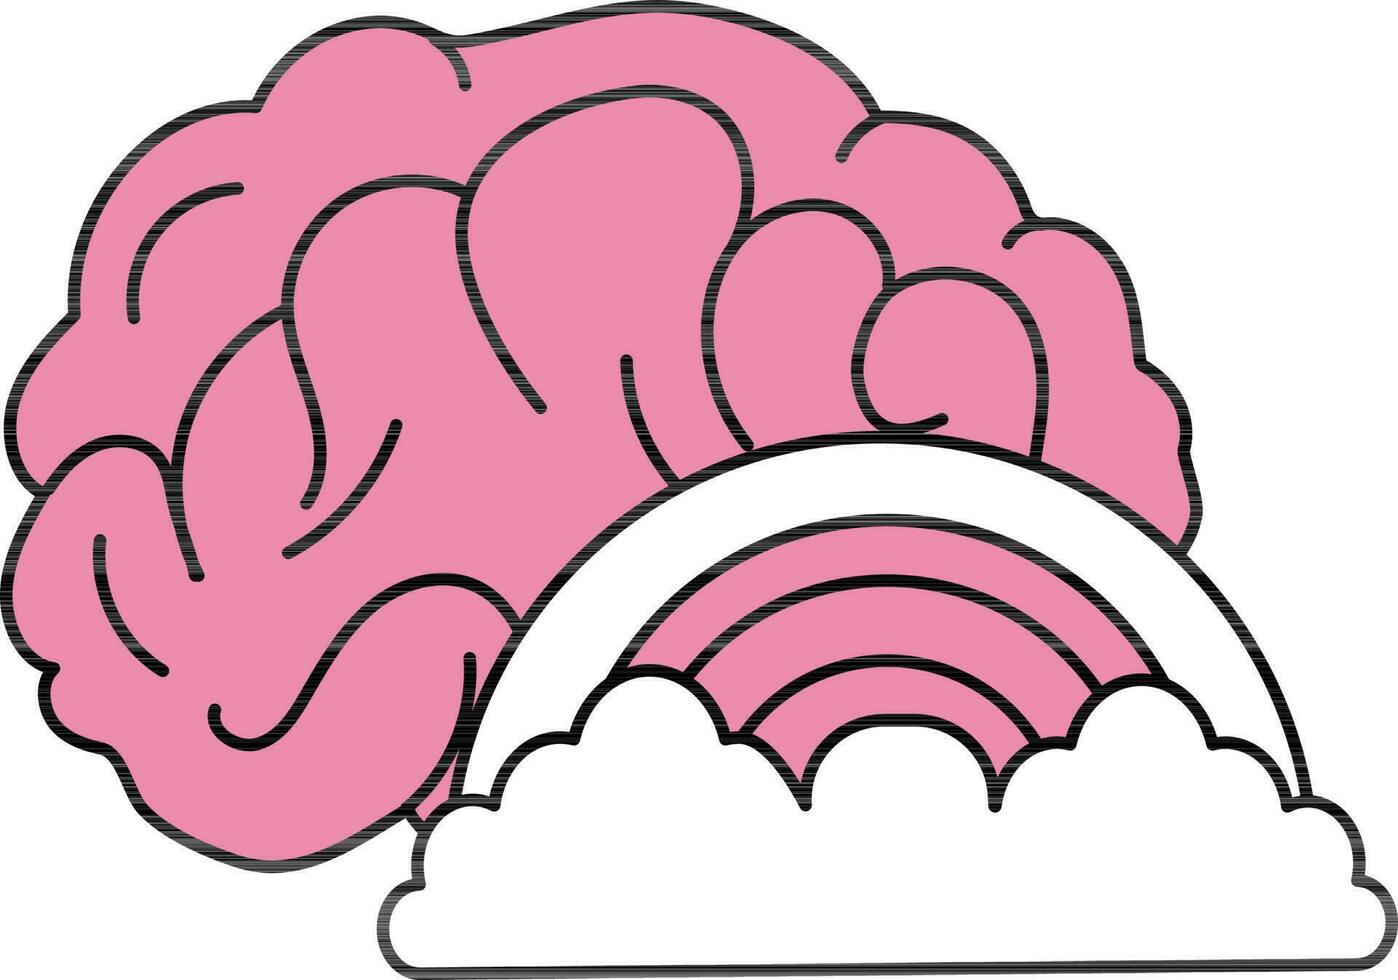 Rainbow With Brain Icon In Pink And White Color. vector